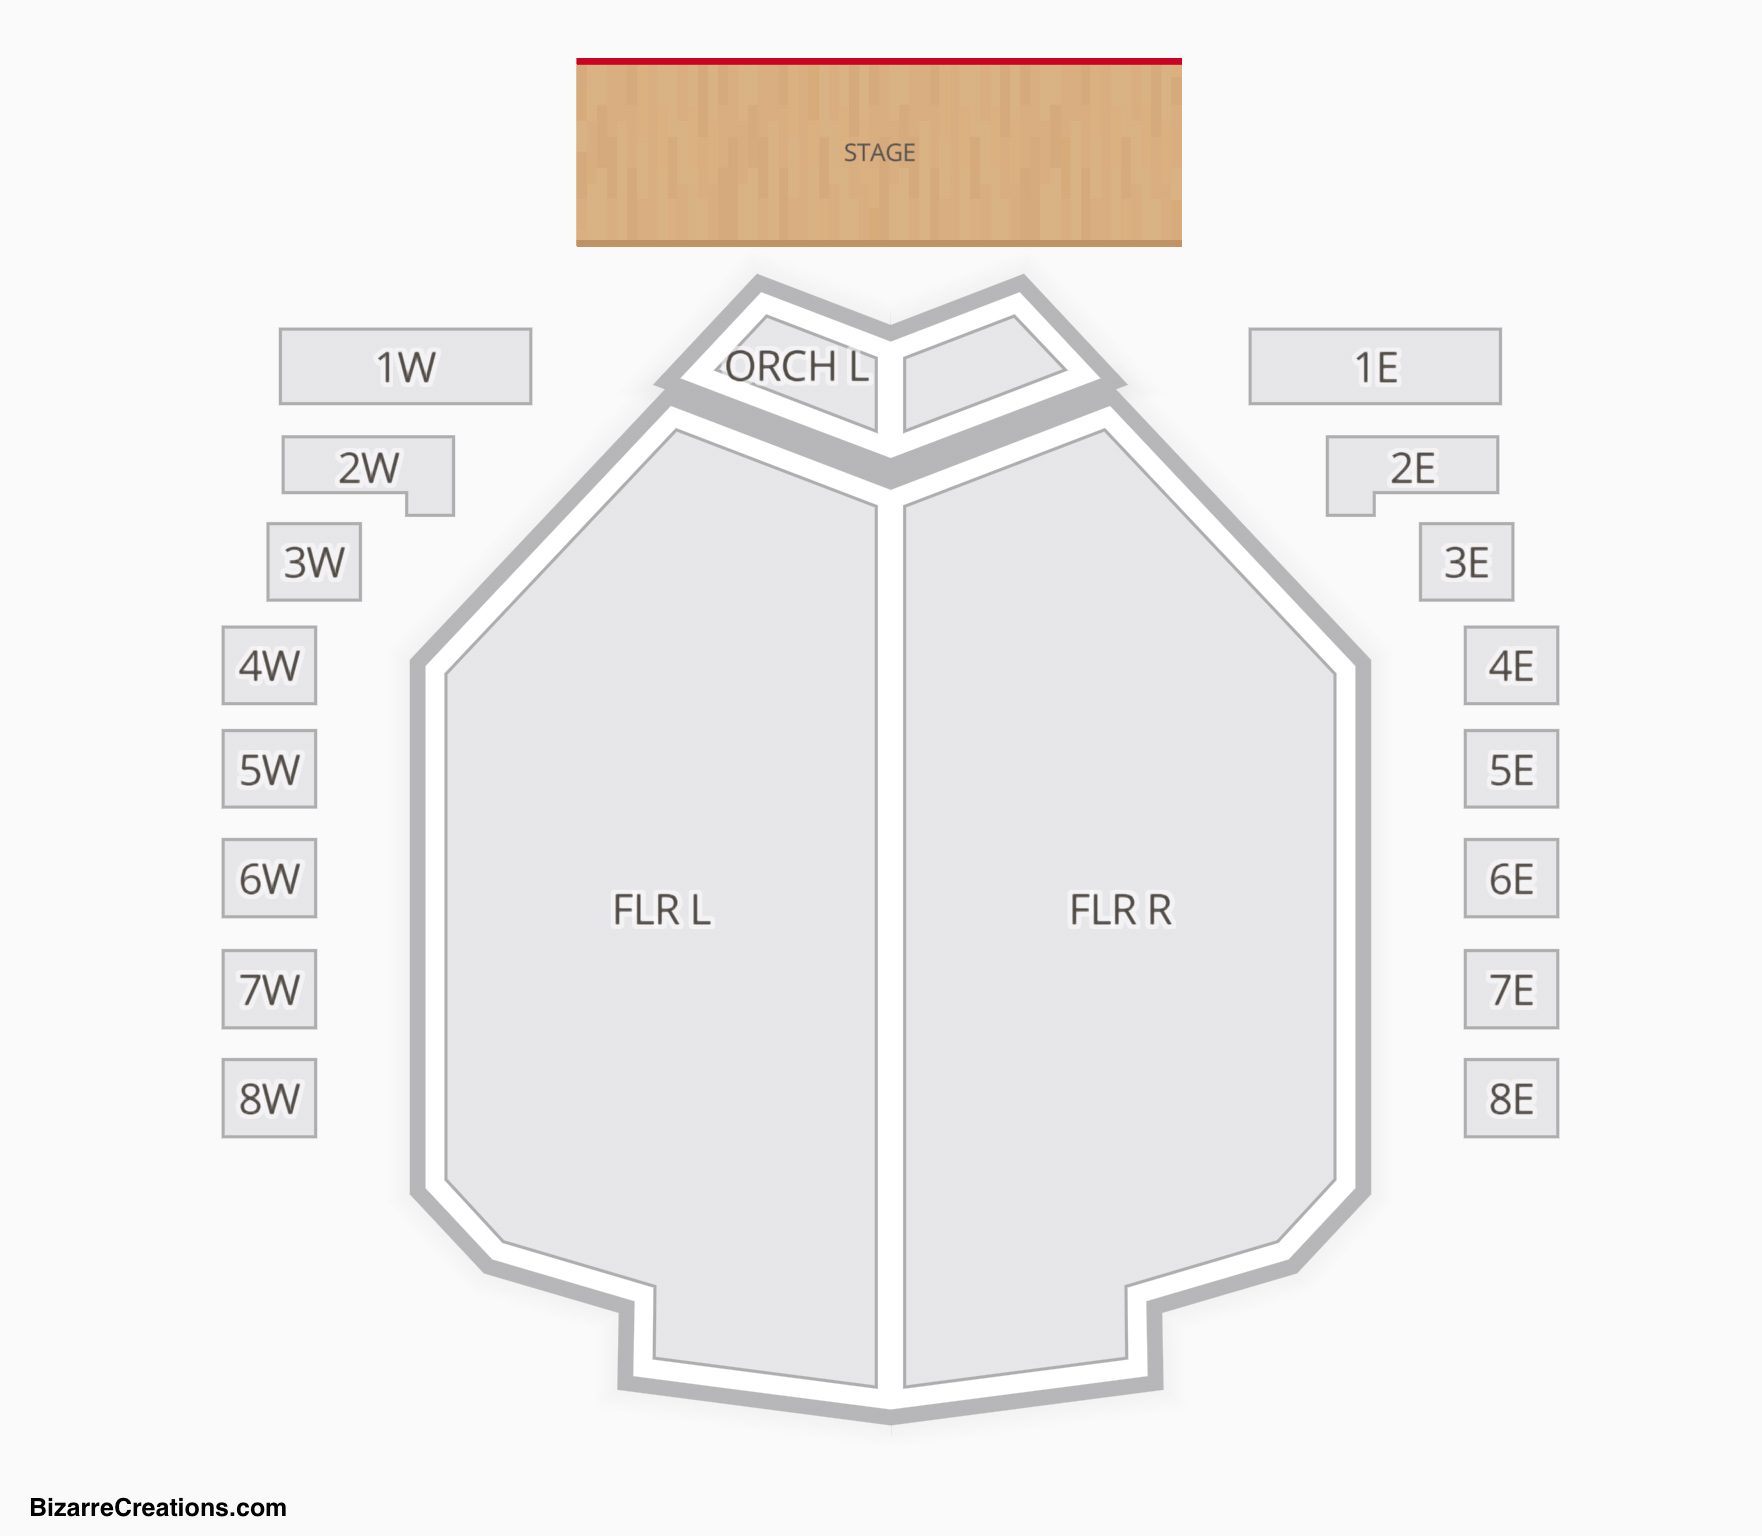 Des Moines Civic Center Seating Charts